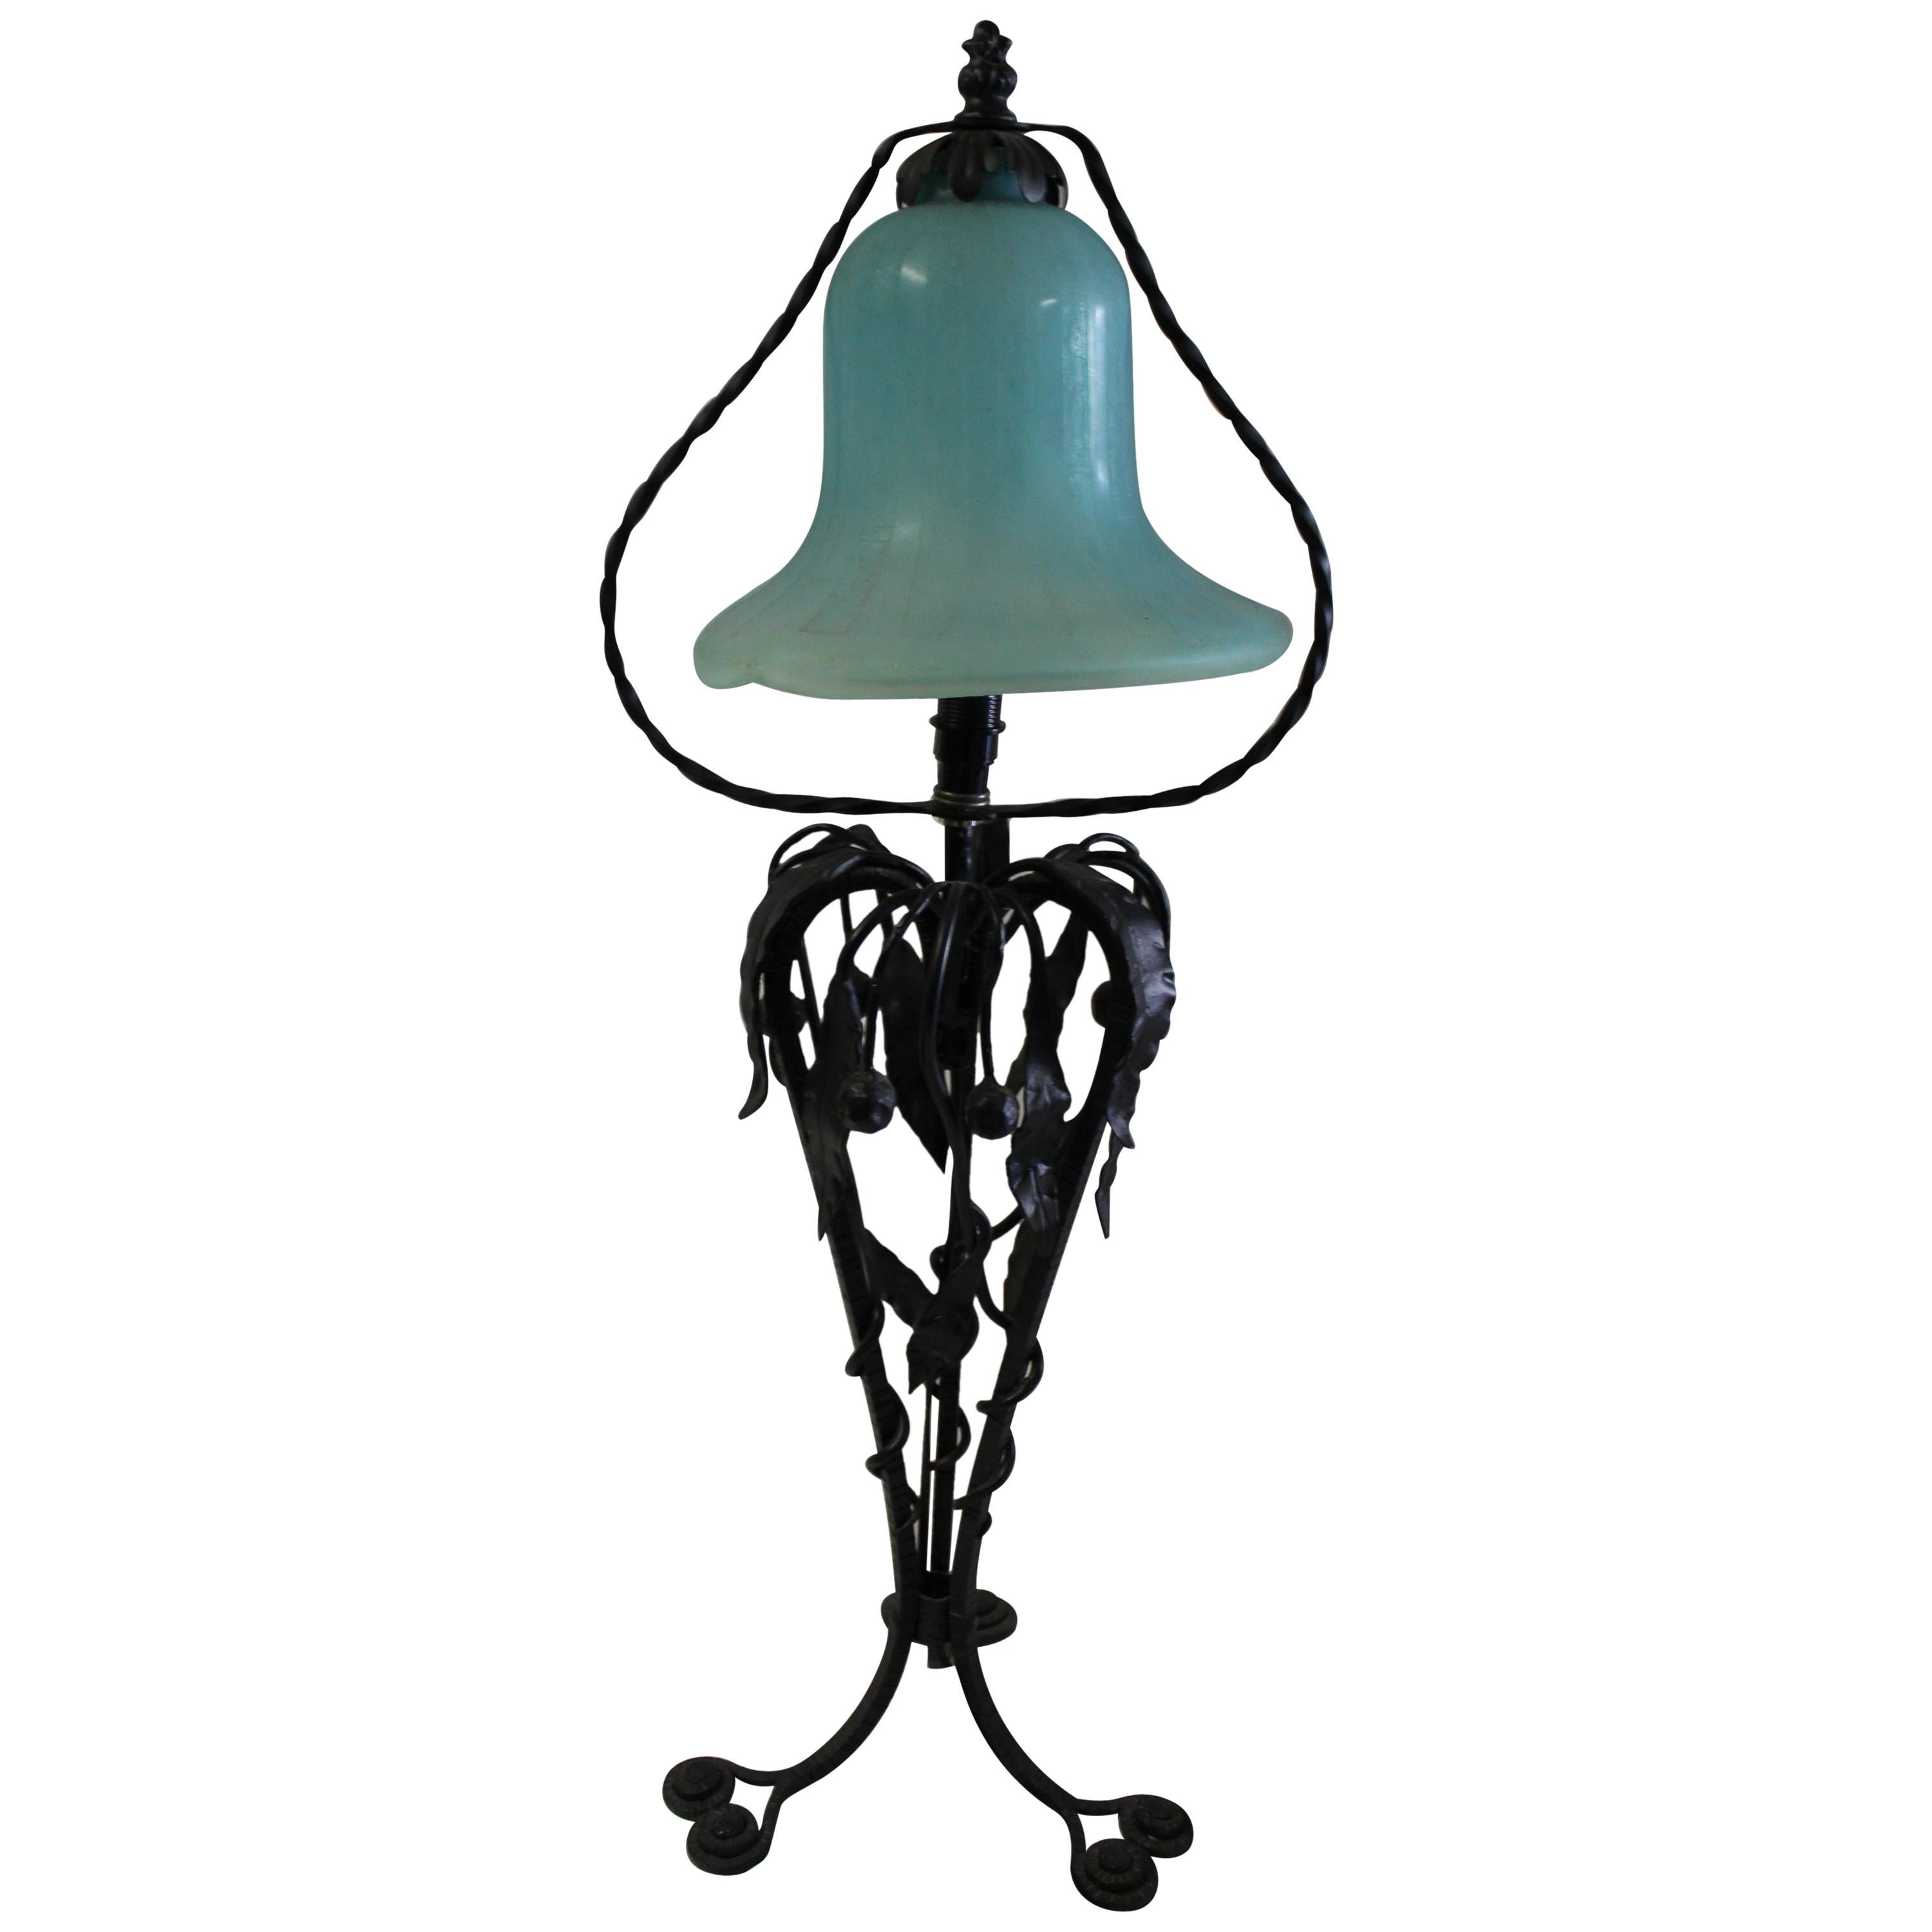 Art Nouveau Table Lamp , Art glass shade  Wrought iron For Sale